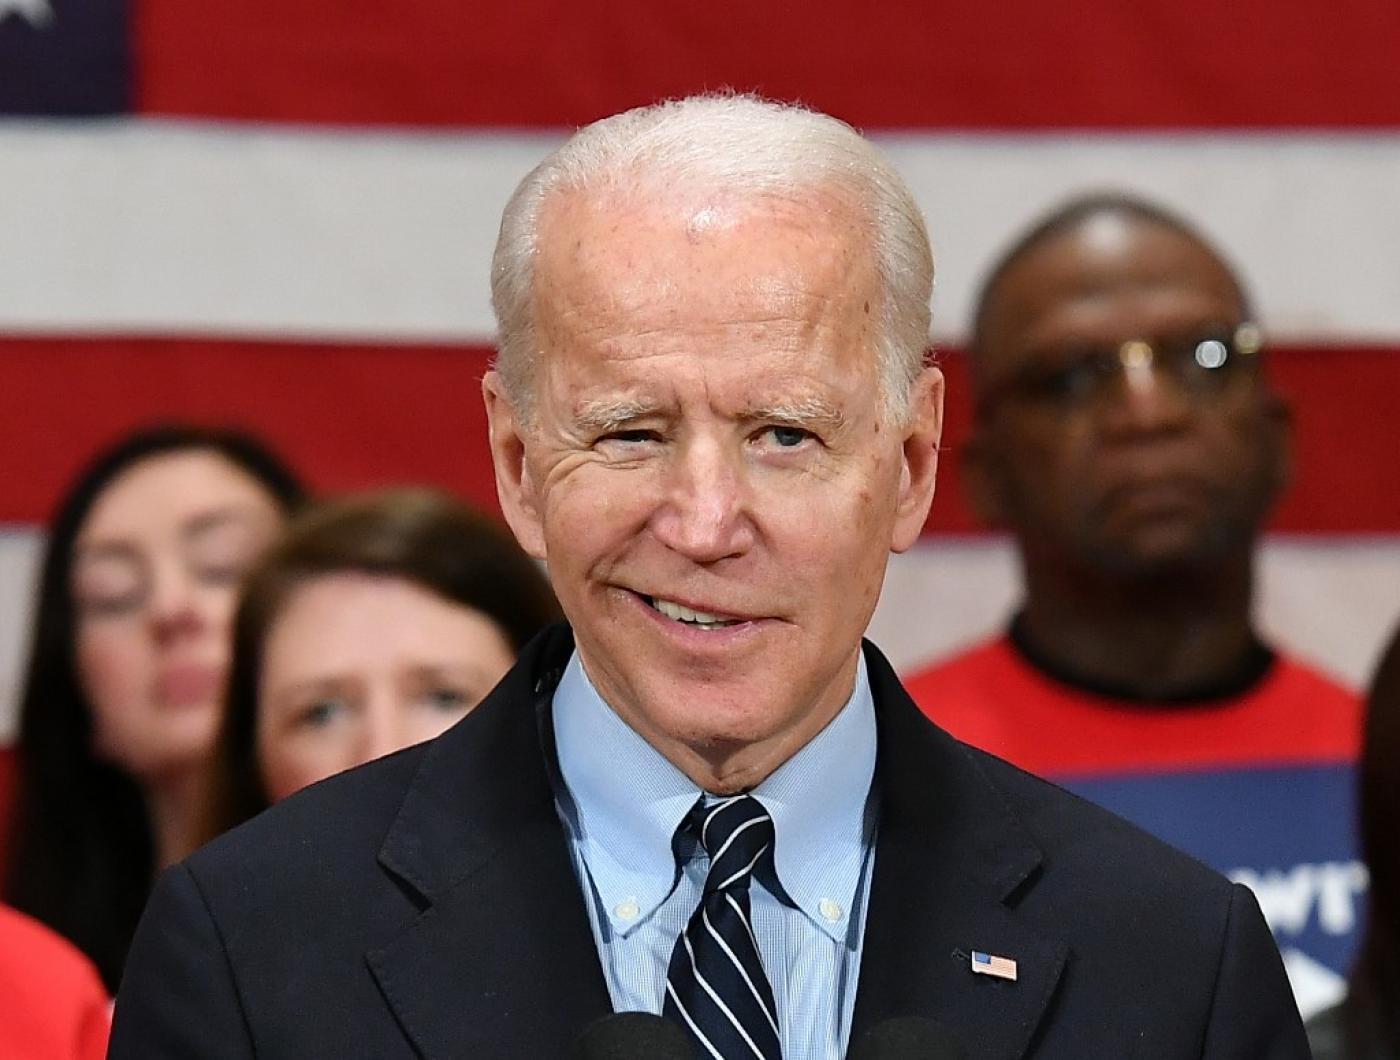 A Biden Presidency Would Perpetuate Us Mistakes in the Middle East